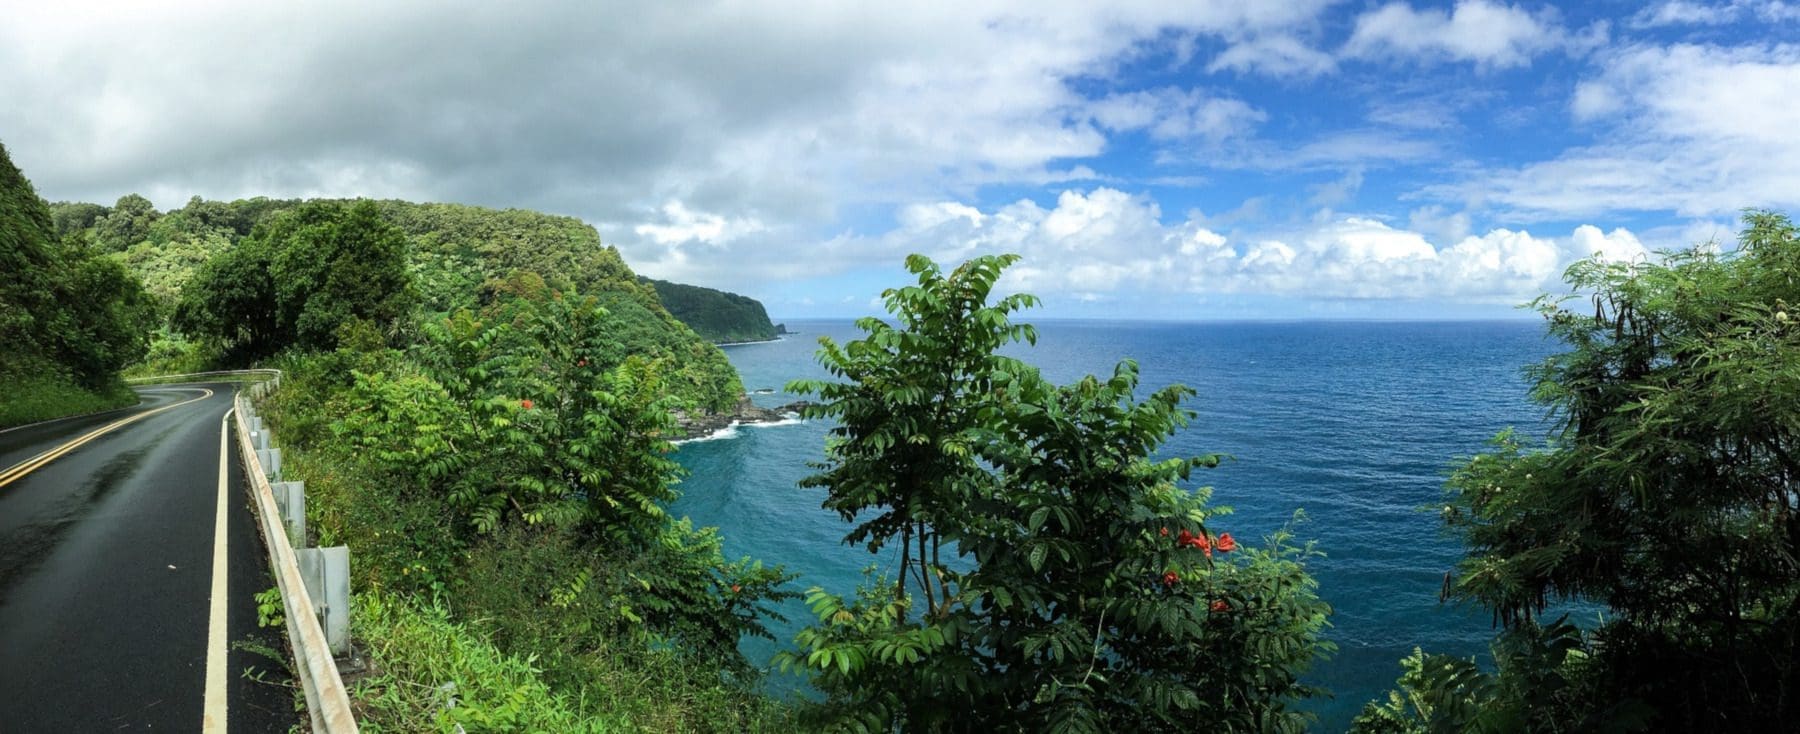 Taking the High Road – Best Scenic Driving Tours of Hawaii